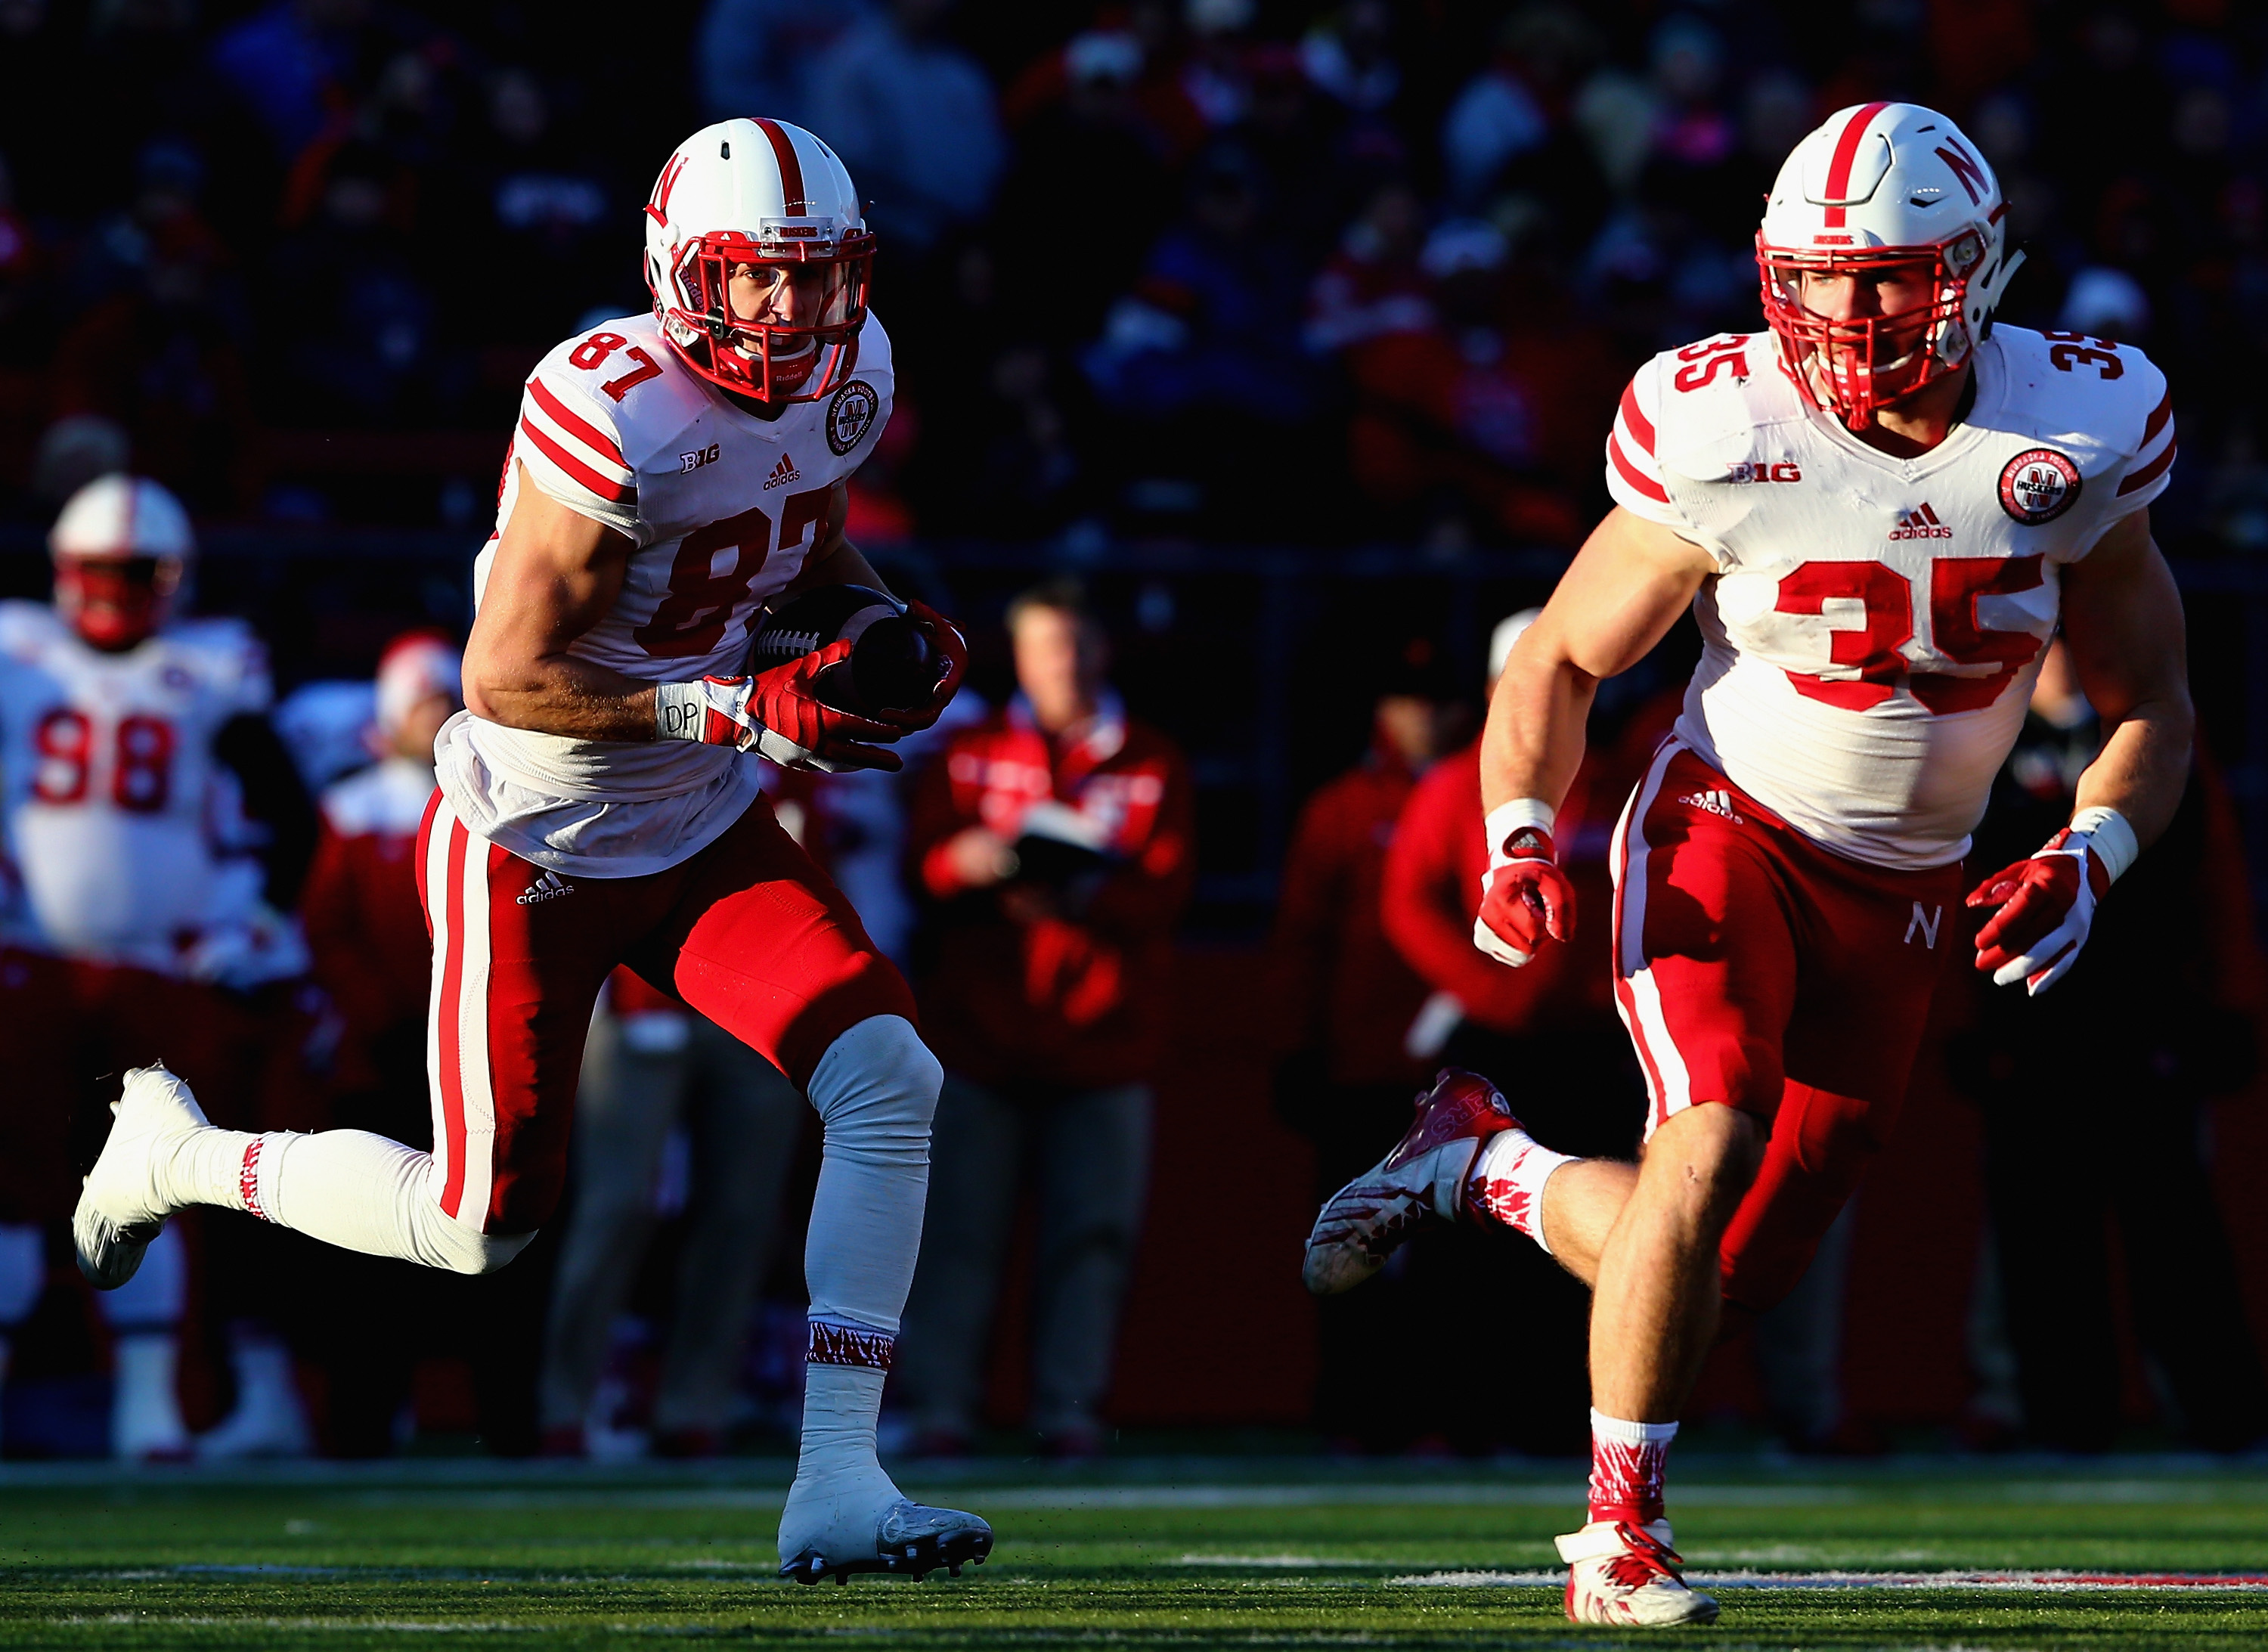 Andy Janovich (#35) exemplified what Husker fans want from their fullback. 